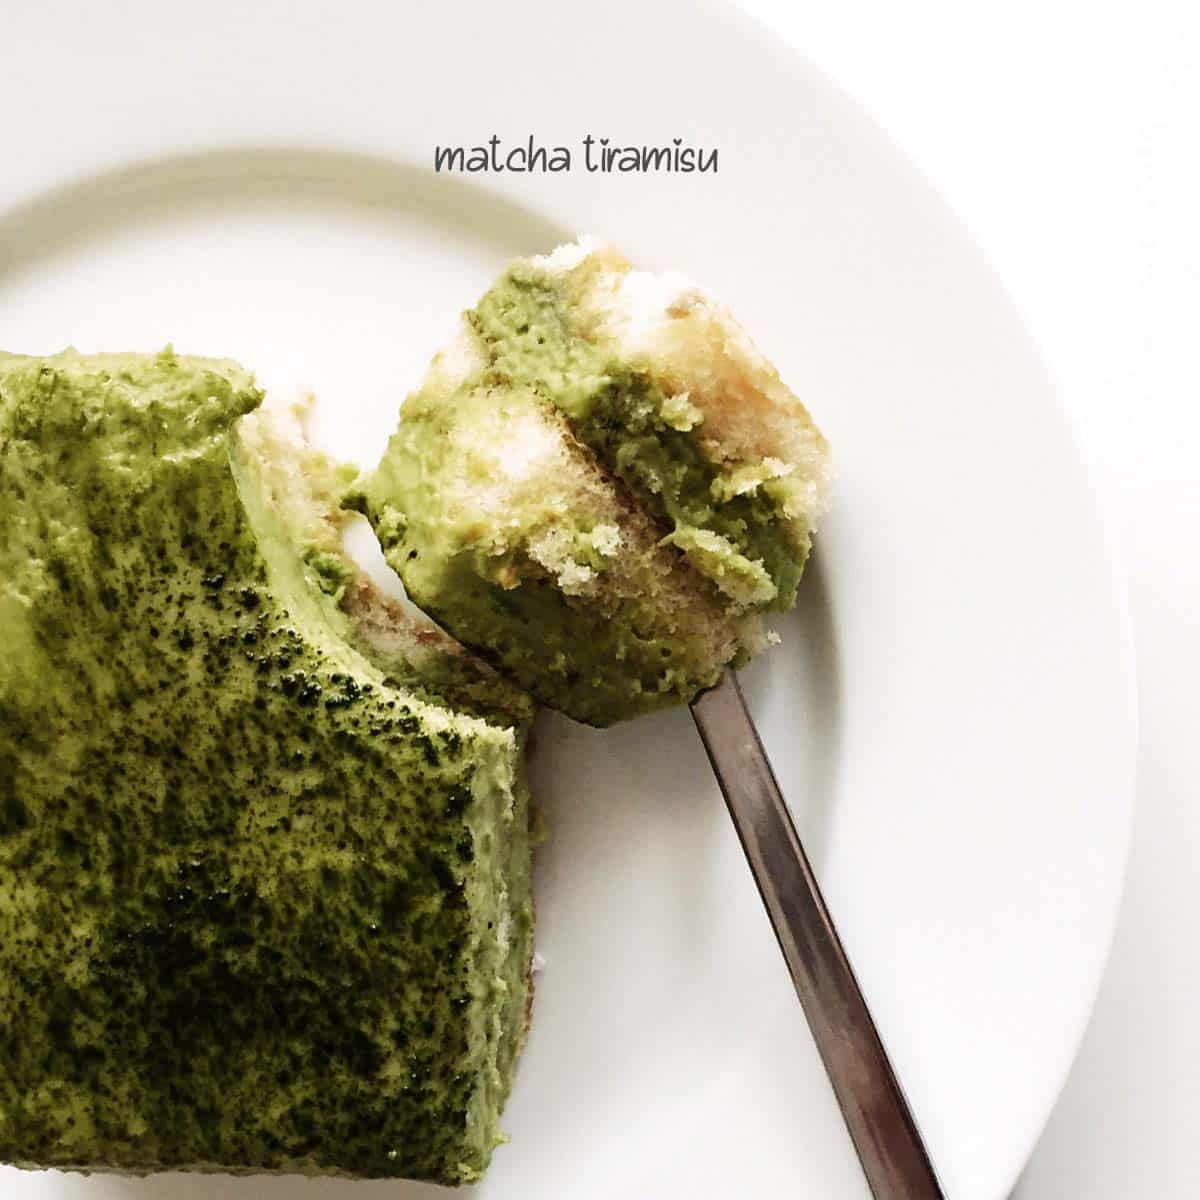 Matcha Tiramisu is a fusion dessert, combining earthy Matcha green tea and the creamy sweetness of Italian Tiramisu. Each ingredient contributes to a symphony of flavors that delights with every bite.